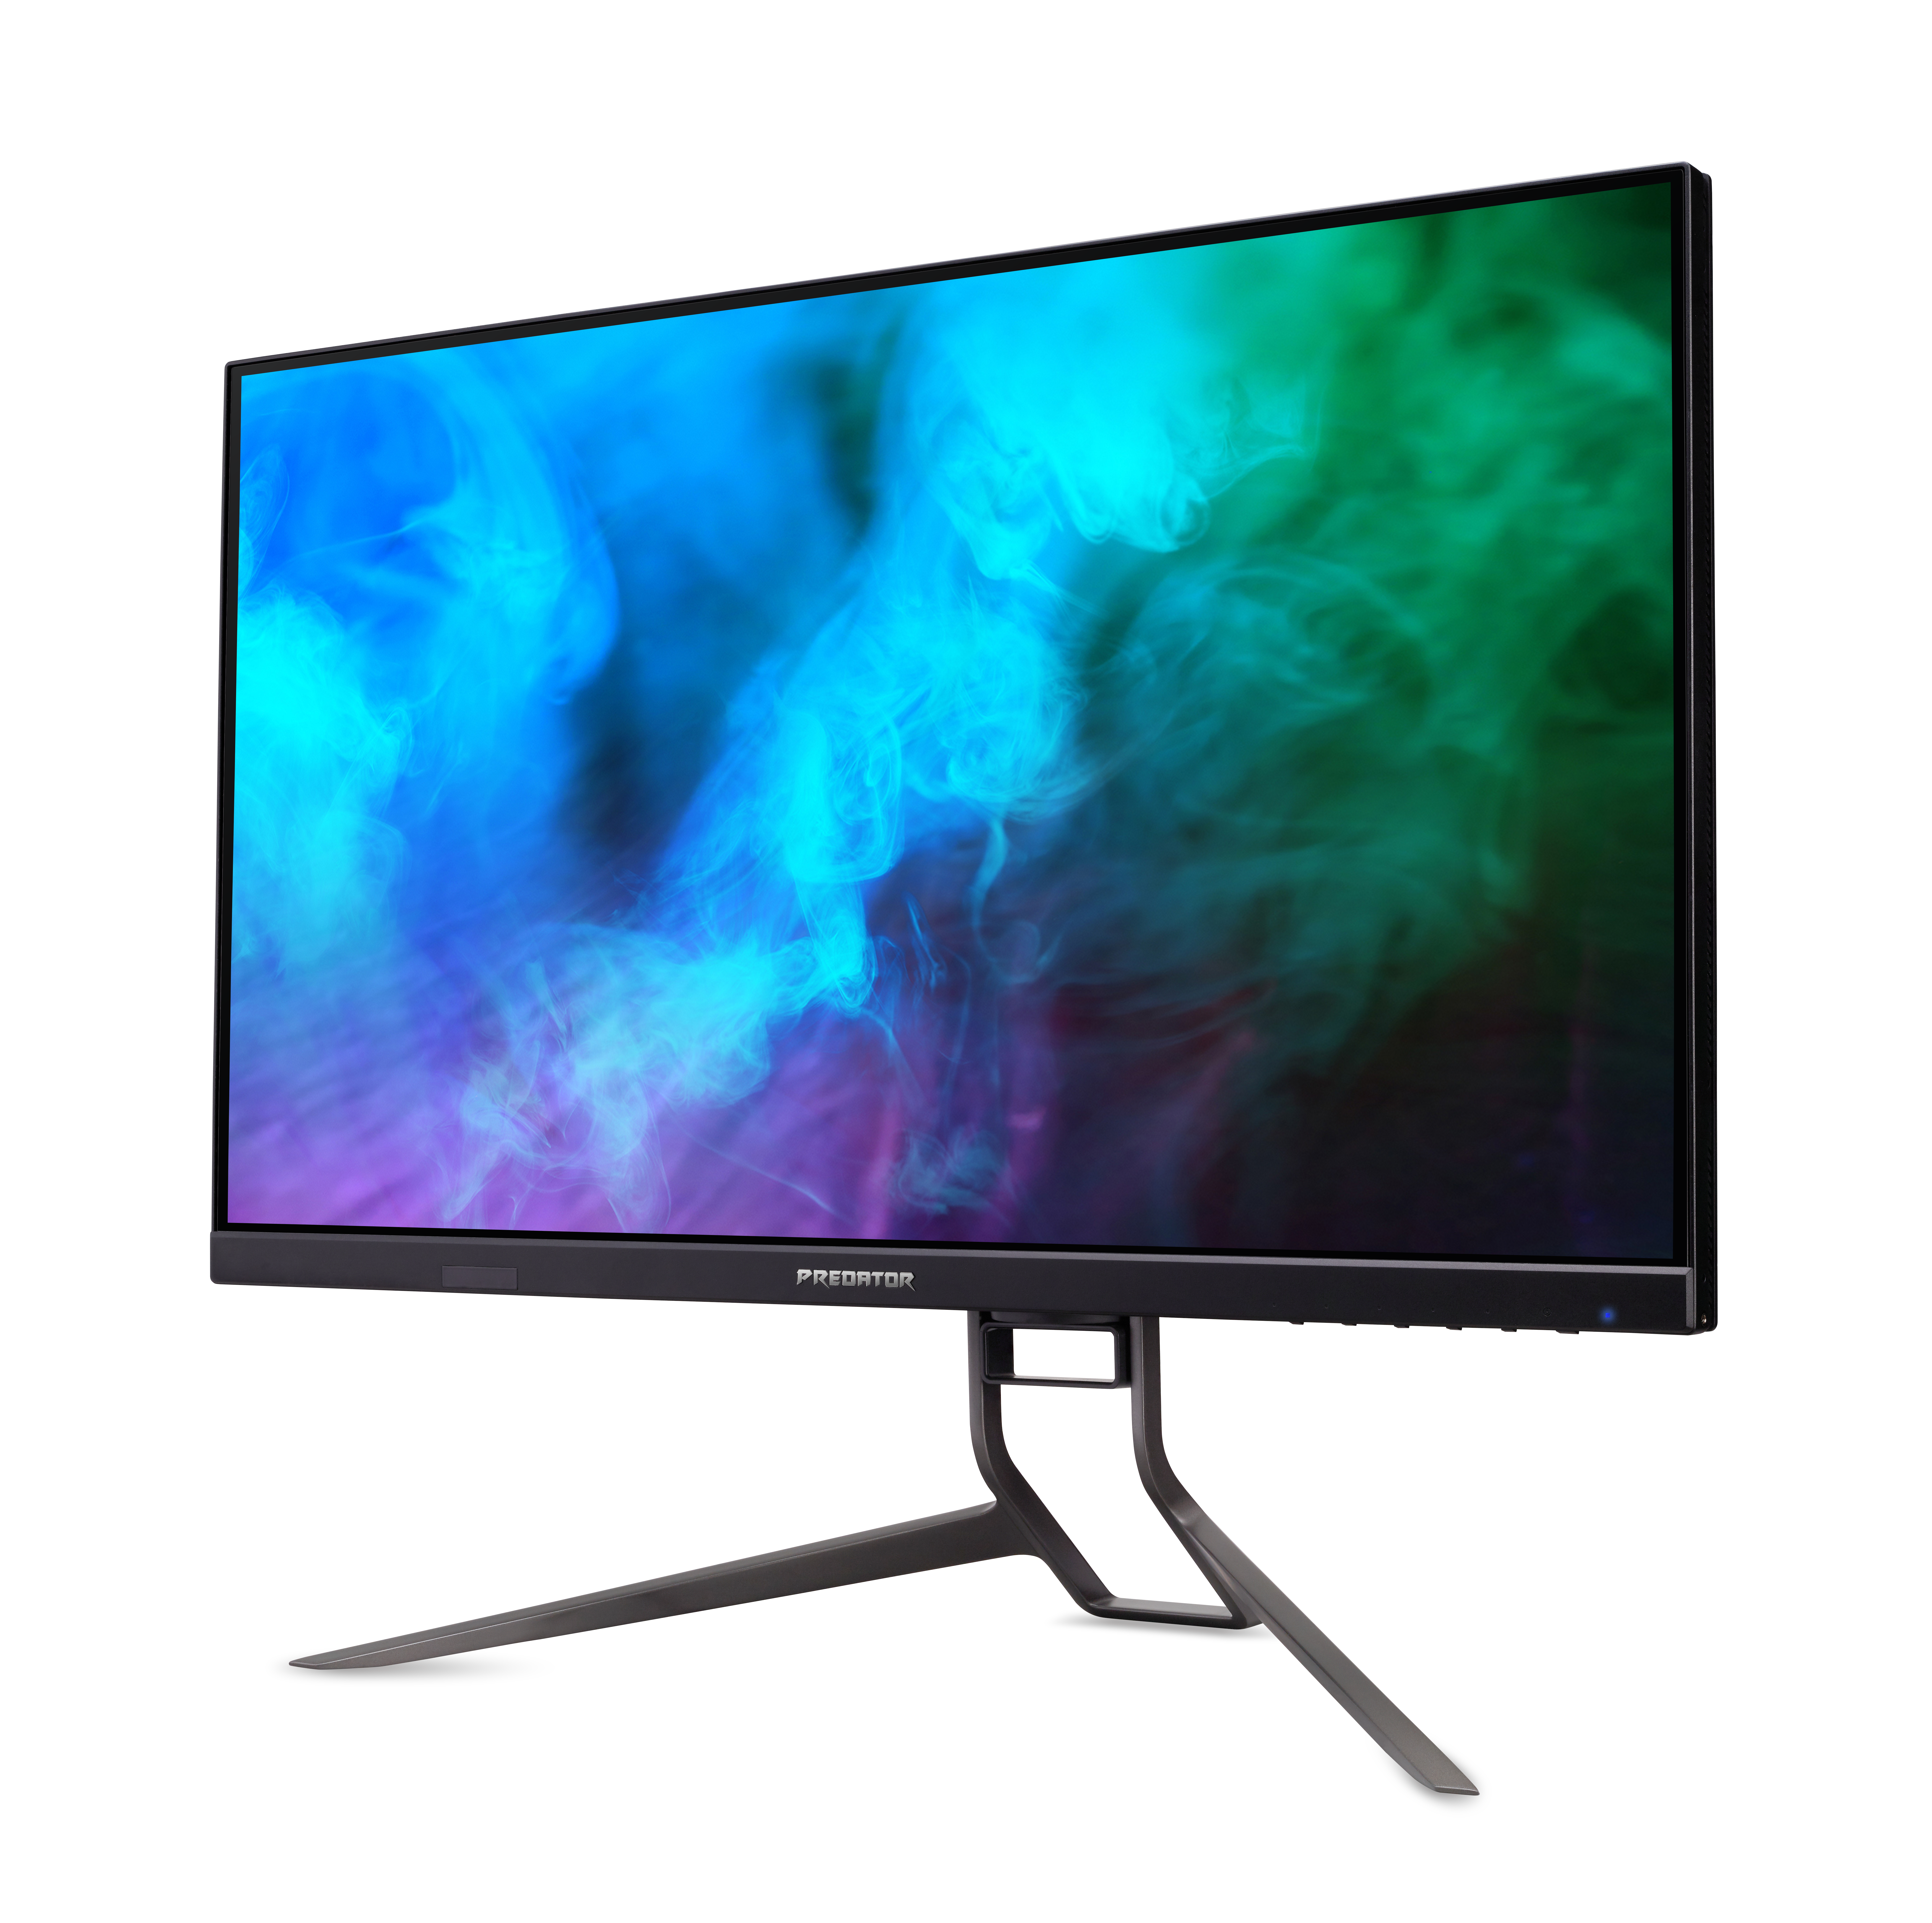 Acer launches console-ready monitors with HDMI 2.1 and 144Hz support 35